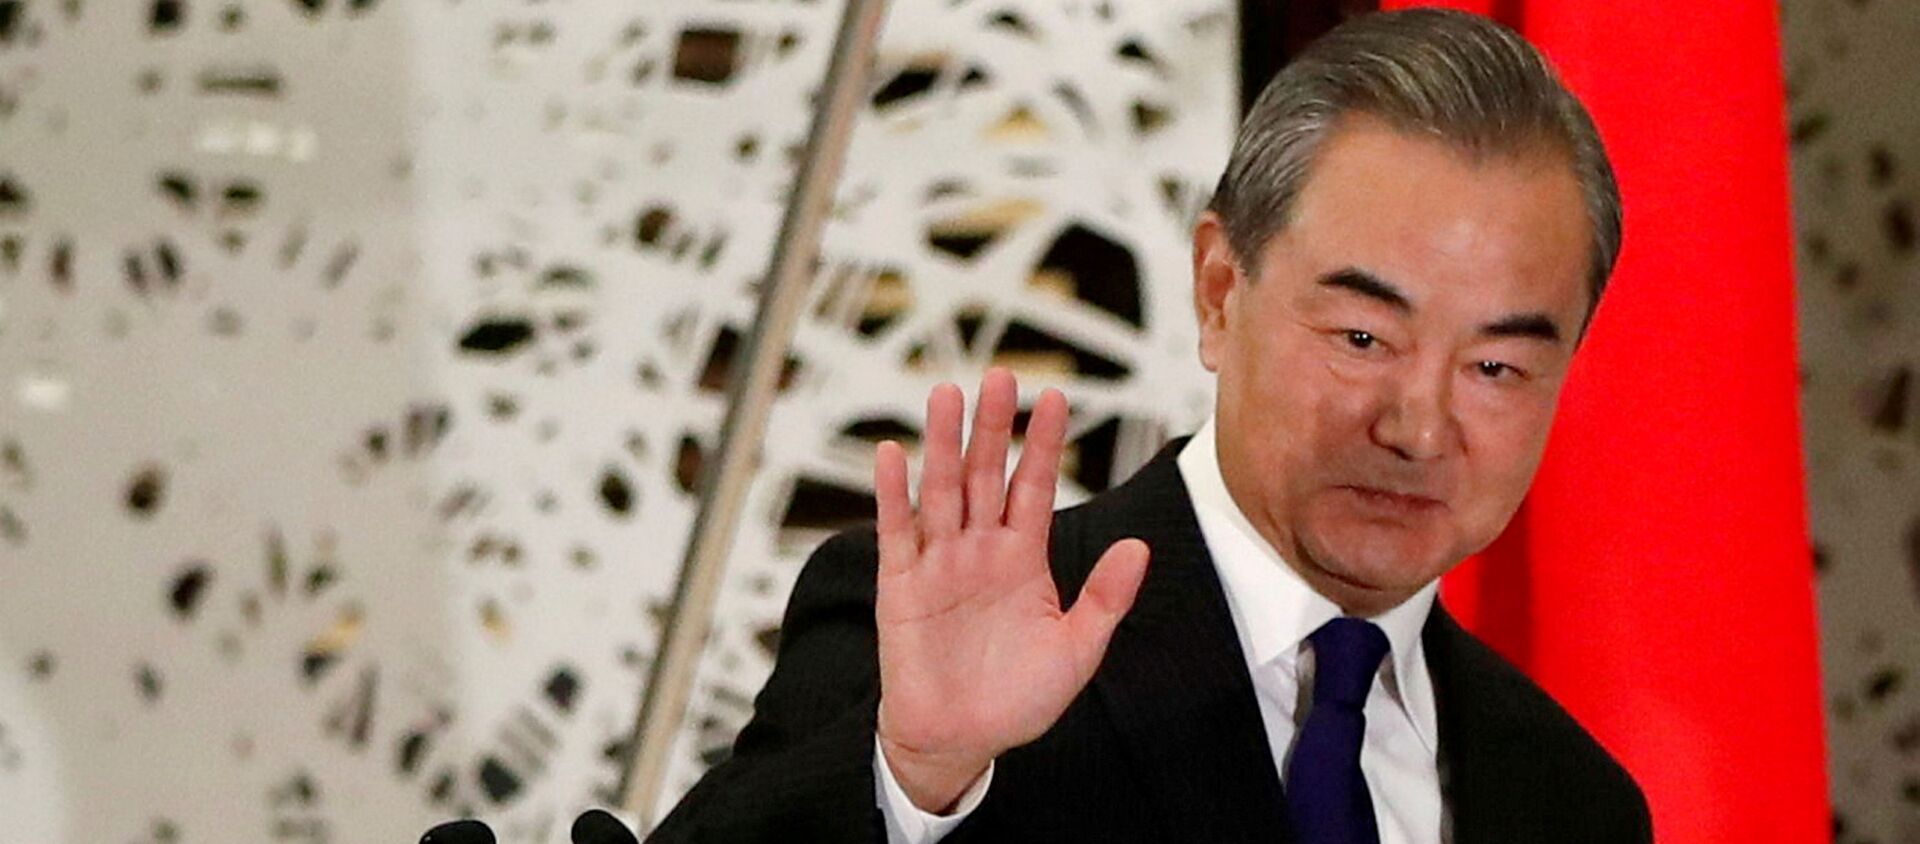 China's State Councillor and Foreign Minister Wang Yi waves as he leaves a news conference in Tokyo, Japan, November 24, 2020. REUTERS/Issei Kato/Pool/File Photo - Sputnik International, 1920, 06.01.2021